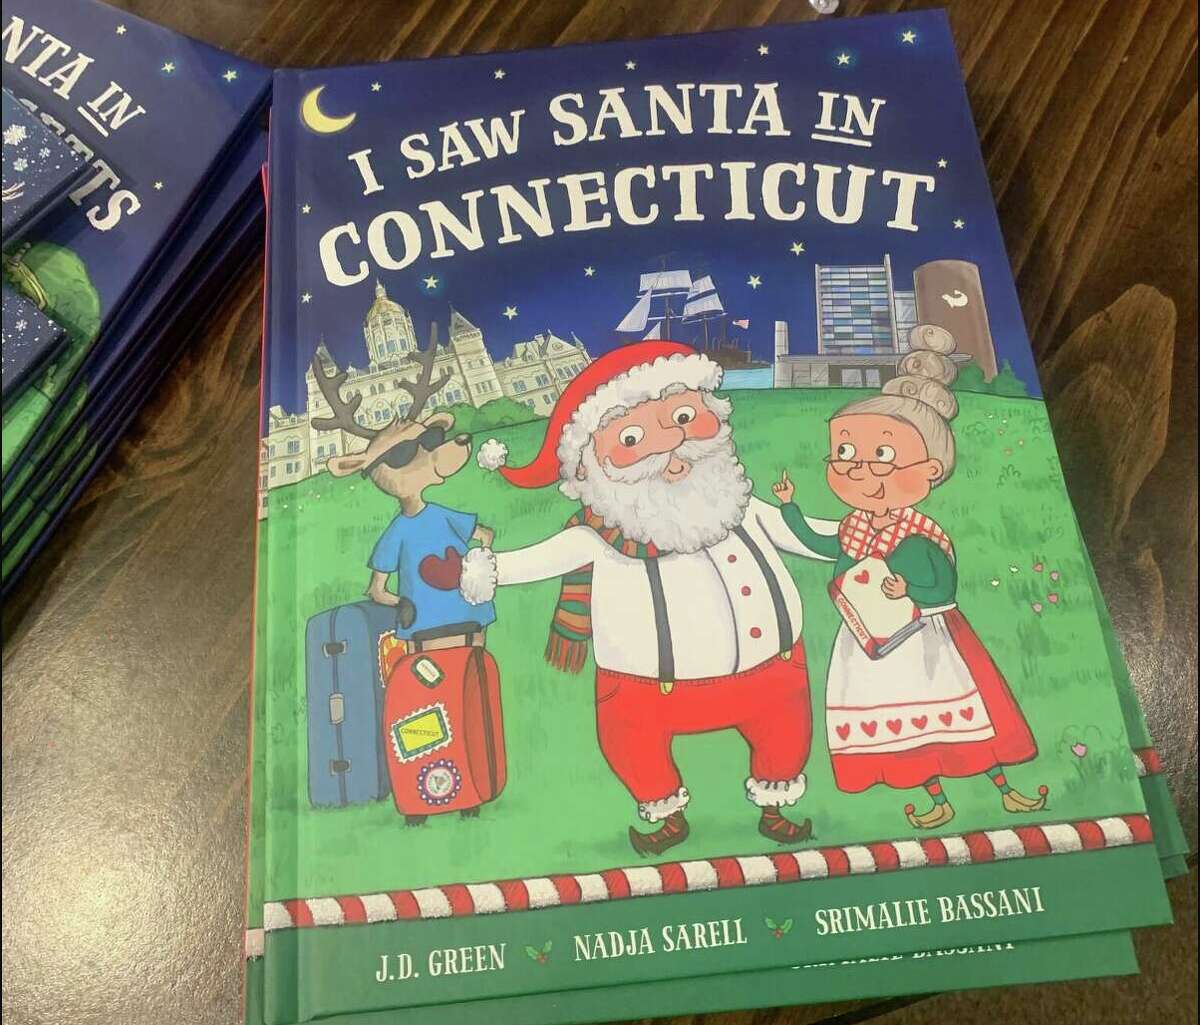 "I saw Santa in Connecticut" by J.D. Green. 